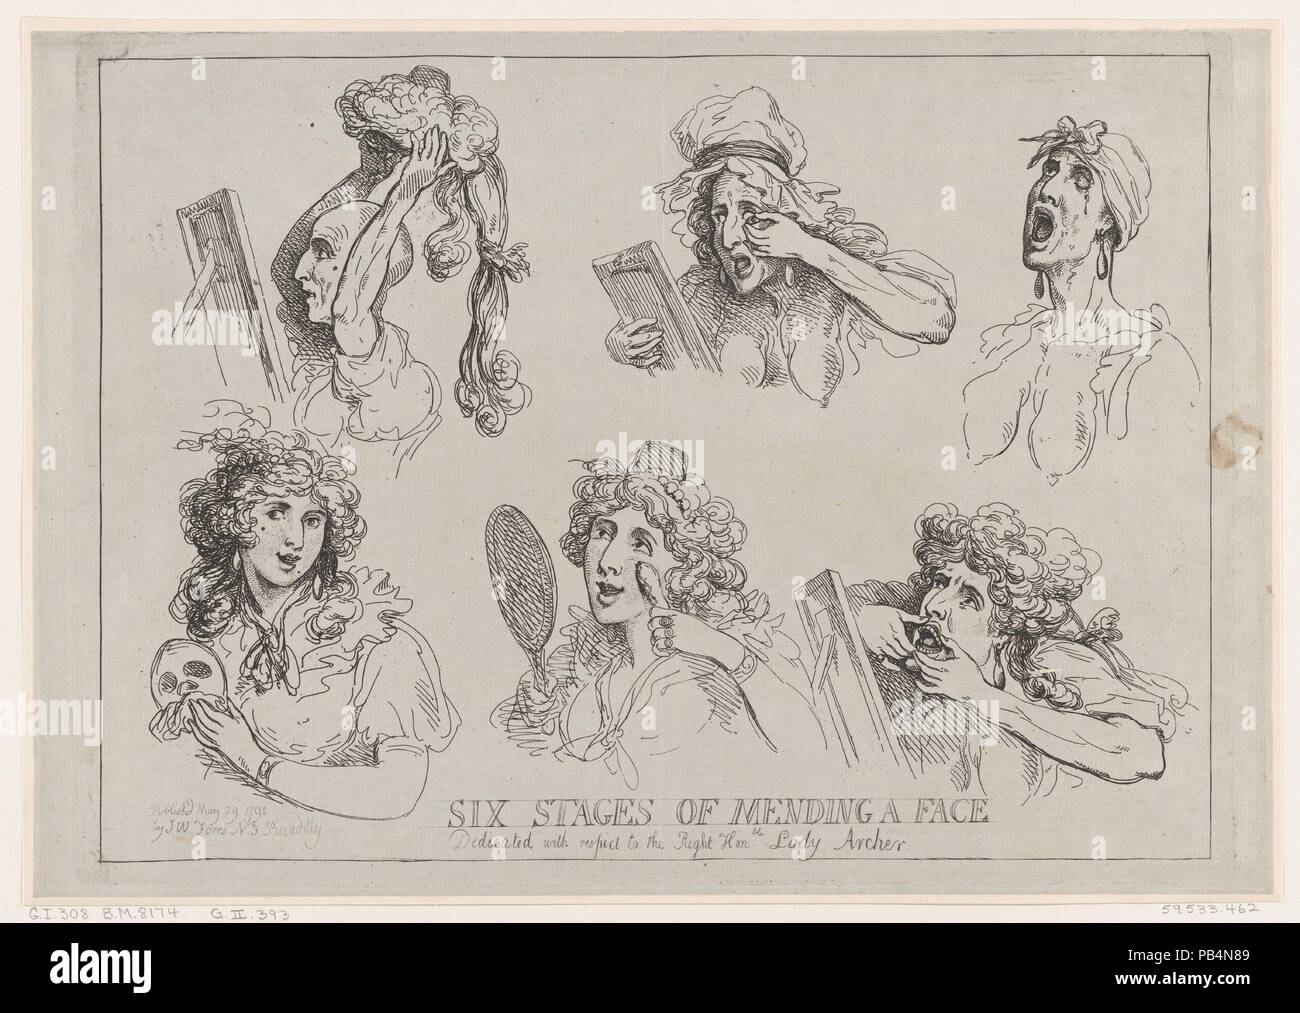 Six Stages of Mending a Face, Dedicated with respect to the Right Hon-ble. Lady Archer. Artist and publisher: Thomas Rowlandson (British, London 1757-1827 London). Dimensions: Sheet: 11 3/16 in. × 16 in. (28.4 × 40.6 cm)  Plate: 10 7/8 × 14 15/16 in. (27.7 × 38 cm). Date: May 29, 1792. Museum: Metropolitan Museum of Art, New York, USA. Stock Photo